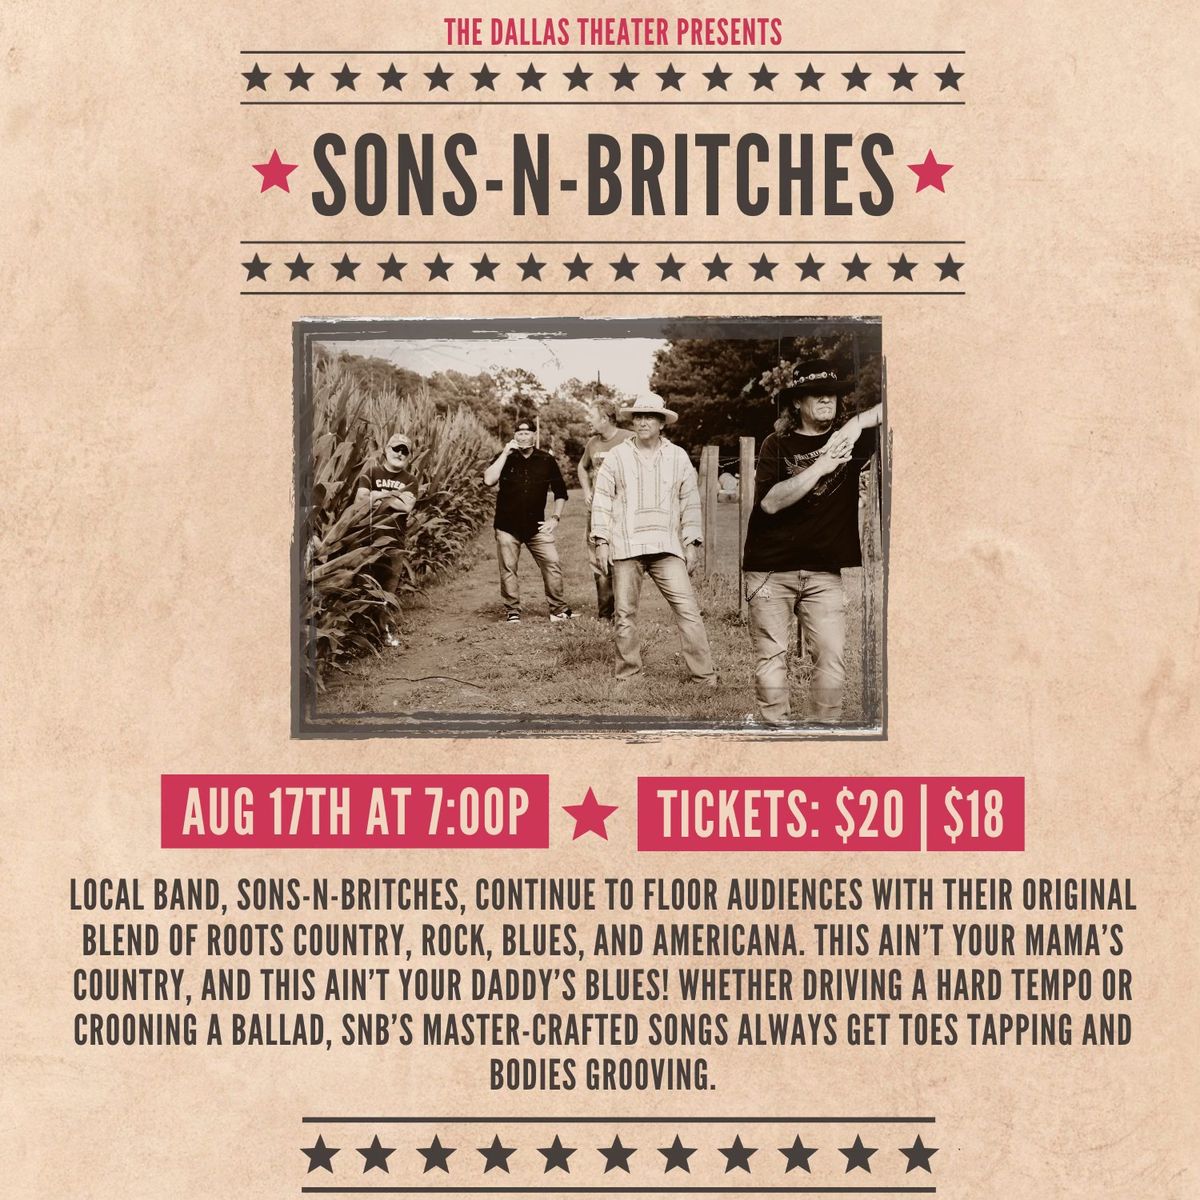 Sons-N-Britches @ The Dallas Theater and Civic Center